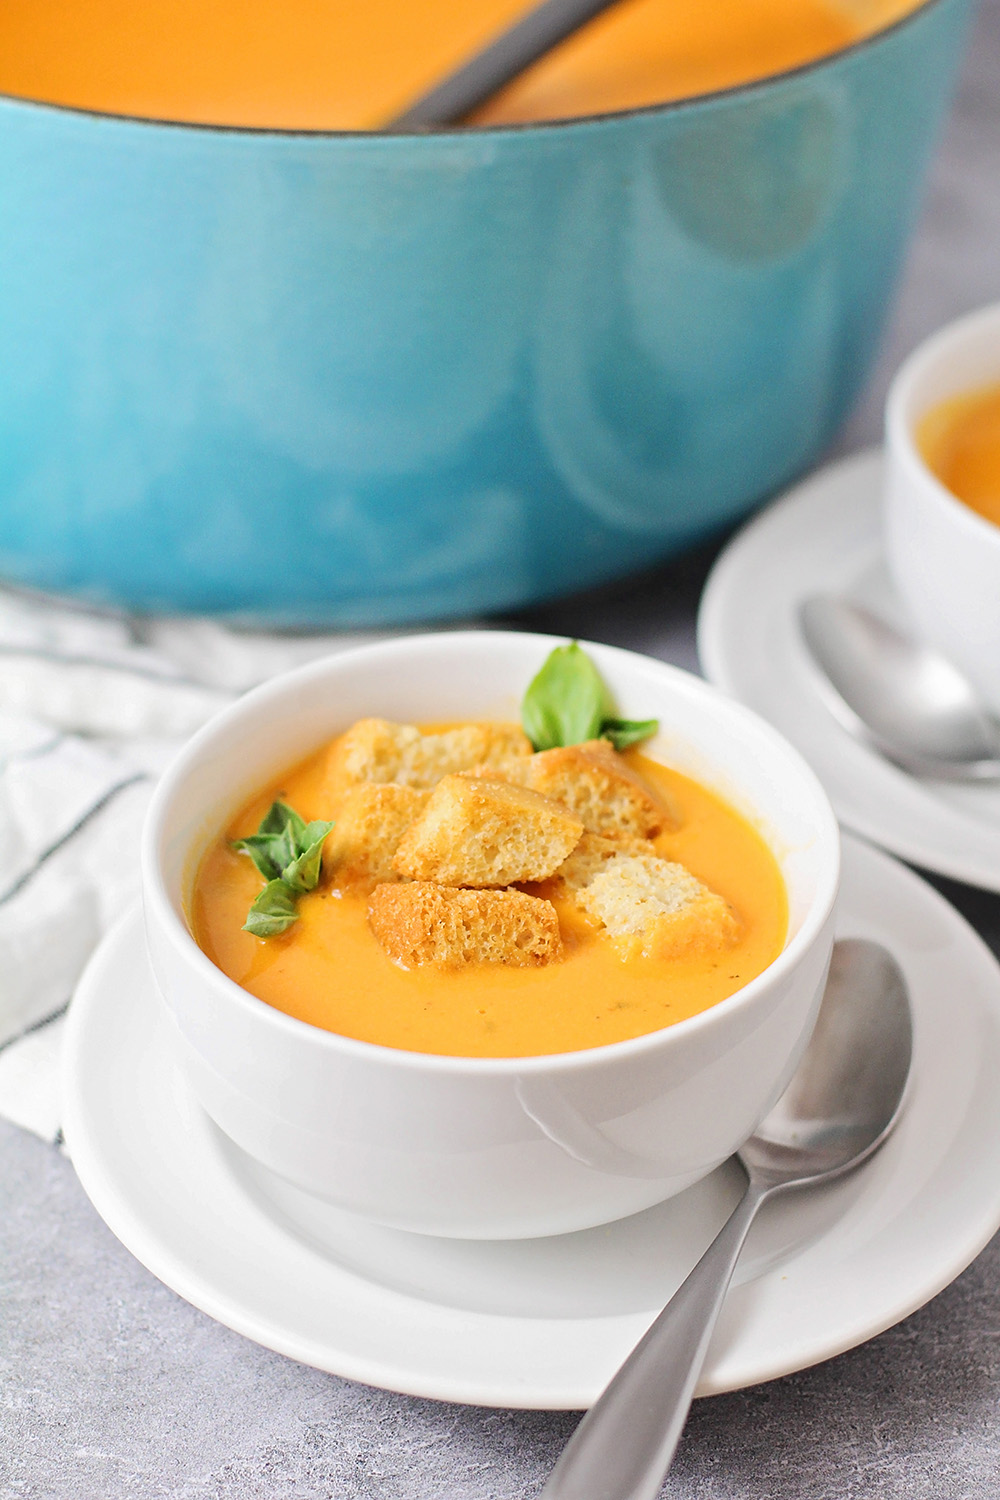 This delicious and savory roasted tomato soup is a great way to use those garden tomatoes!